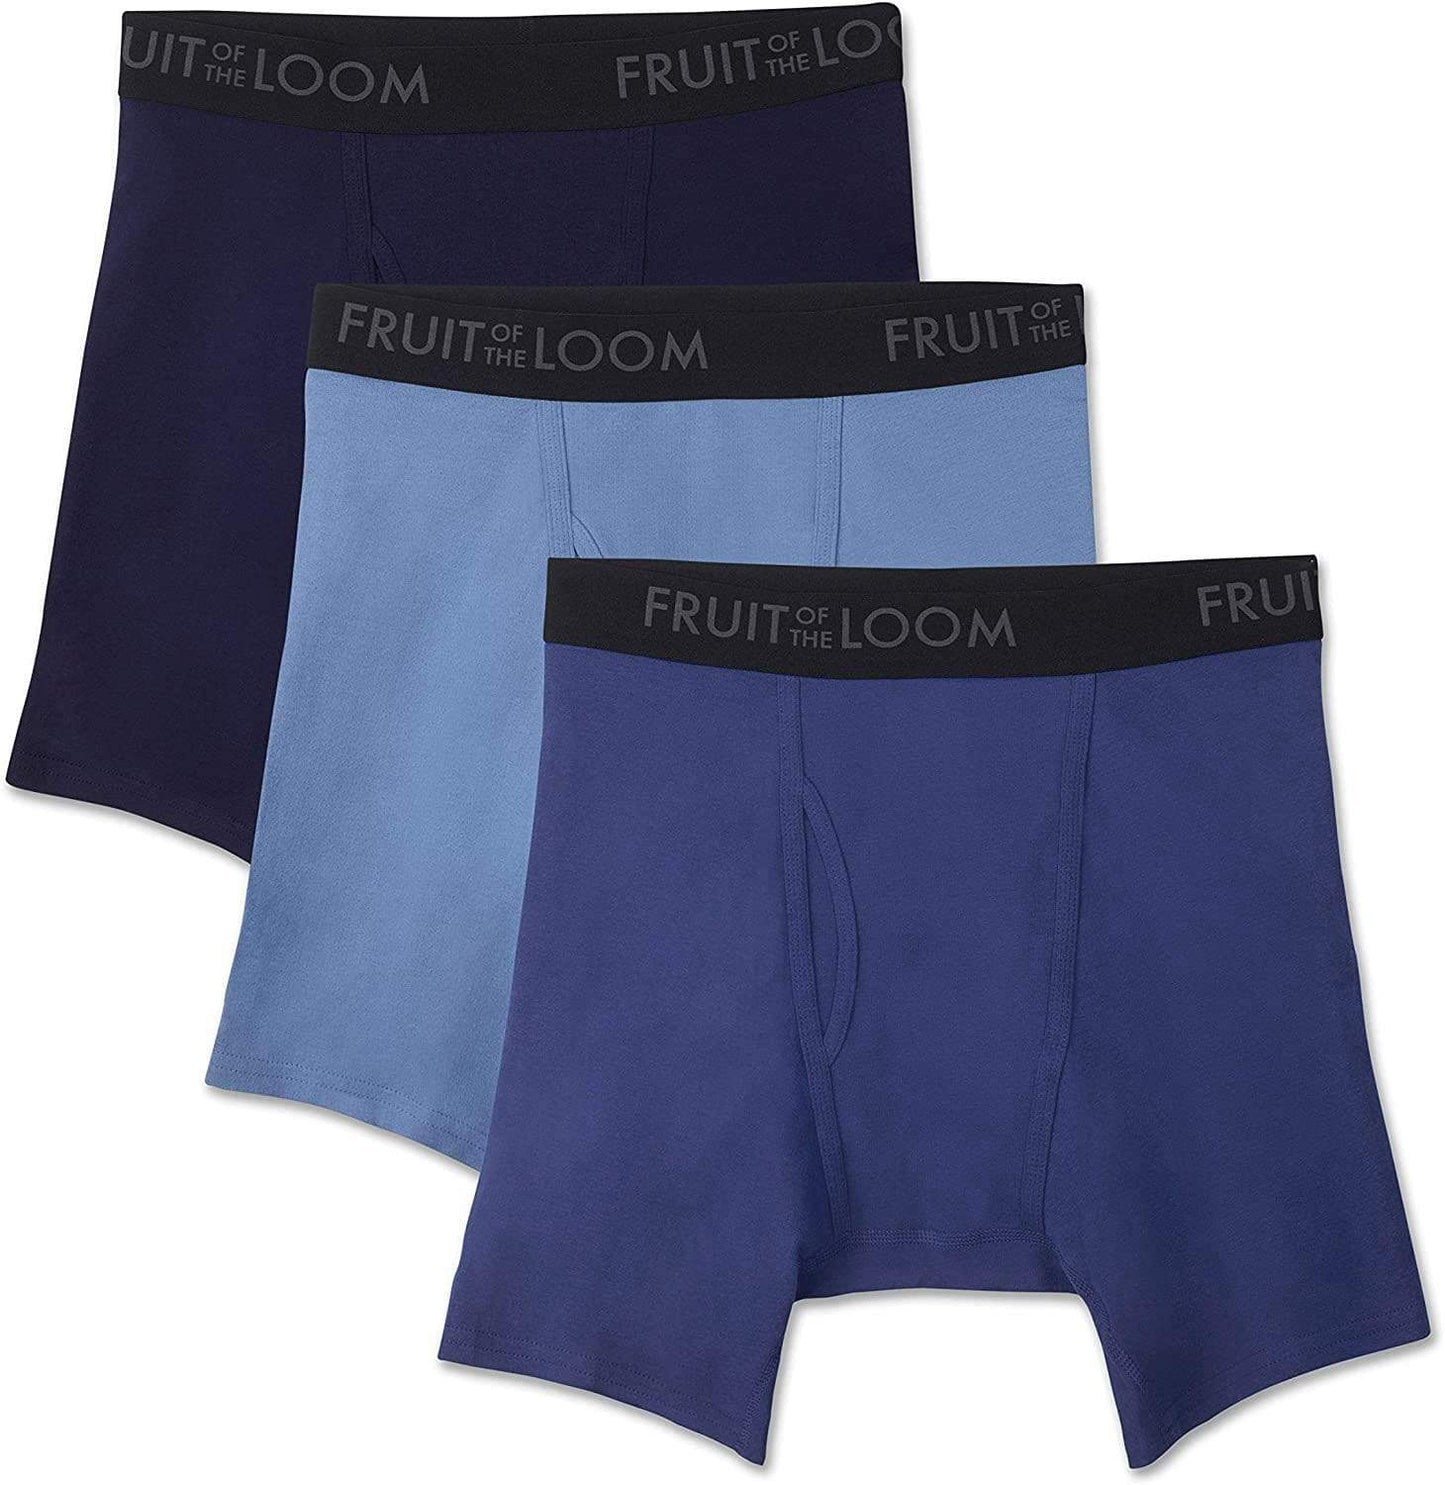 FRUIT OF THE LOOM - Breathable Cotton Micro-Mesh Boxer Briefs - 4